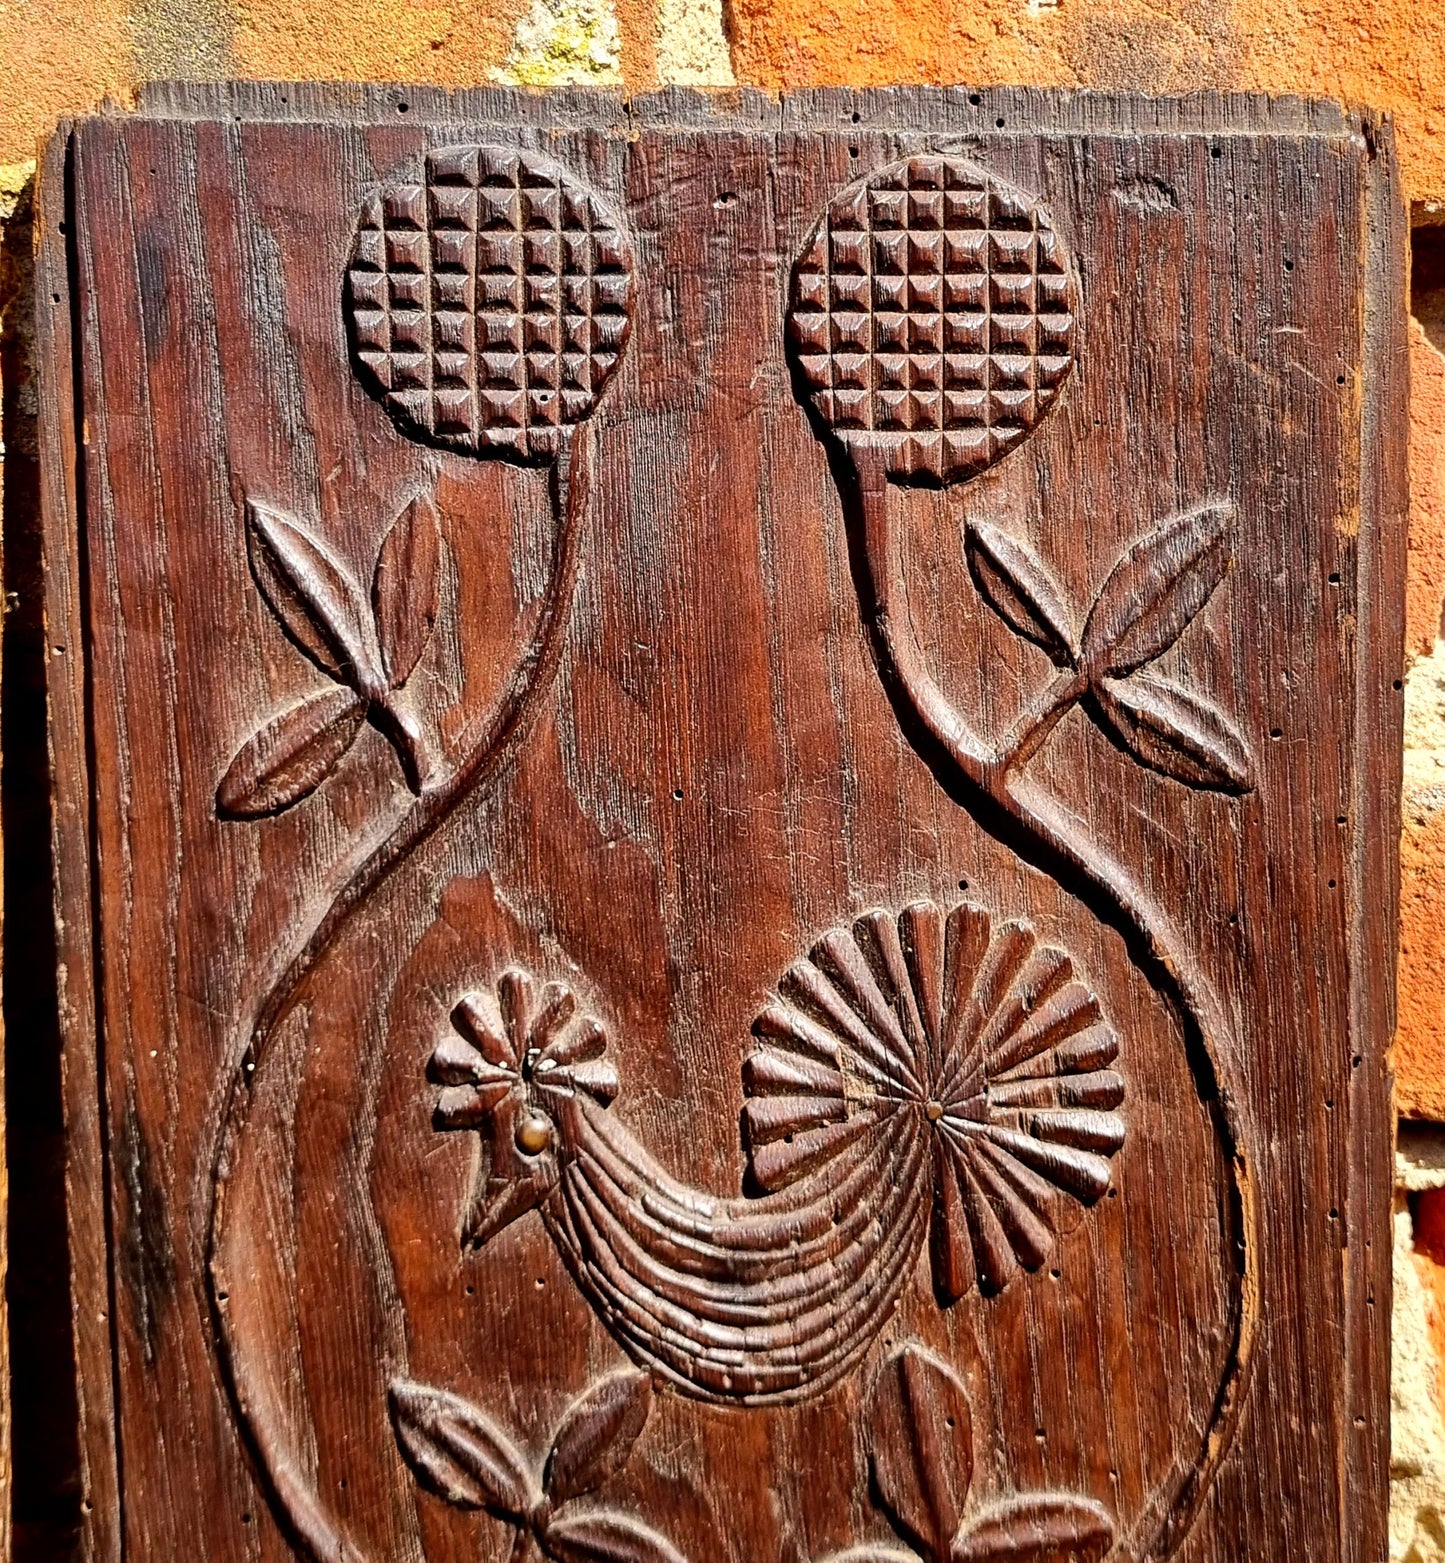 Rare Pair of Late 17th Century French Antique Carved Oak Panels Depicting Birds / Cockerels